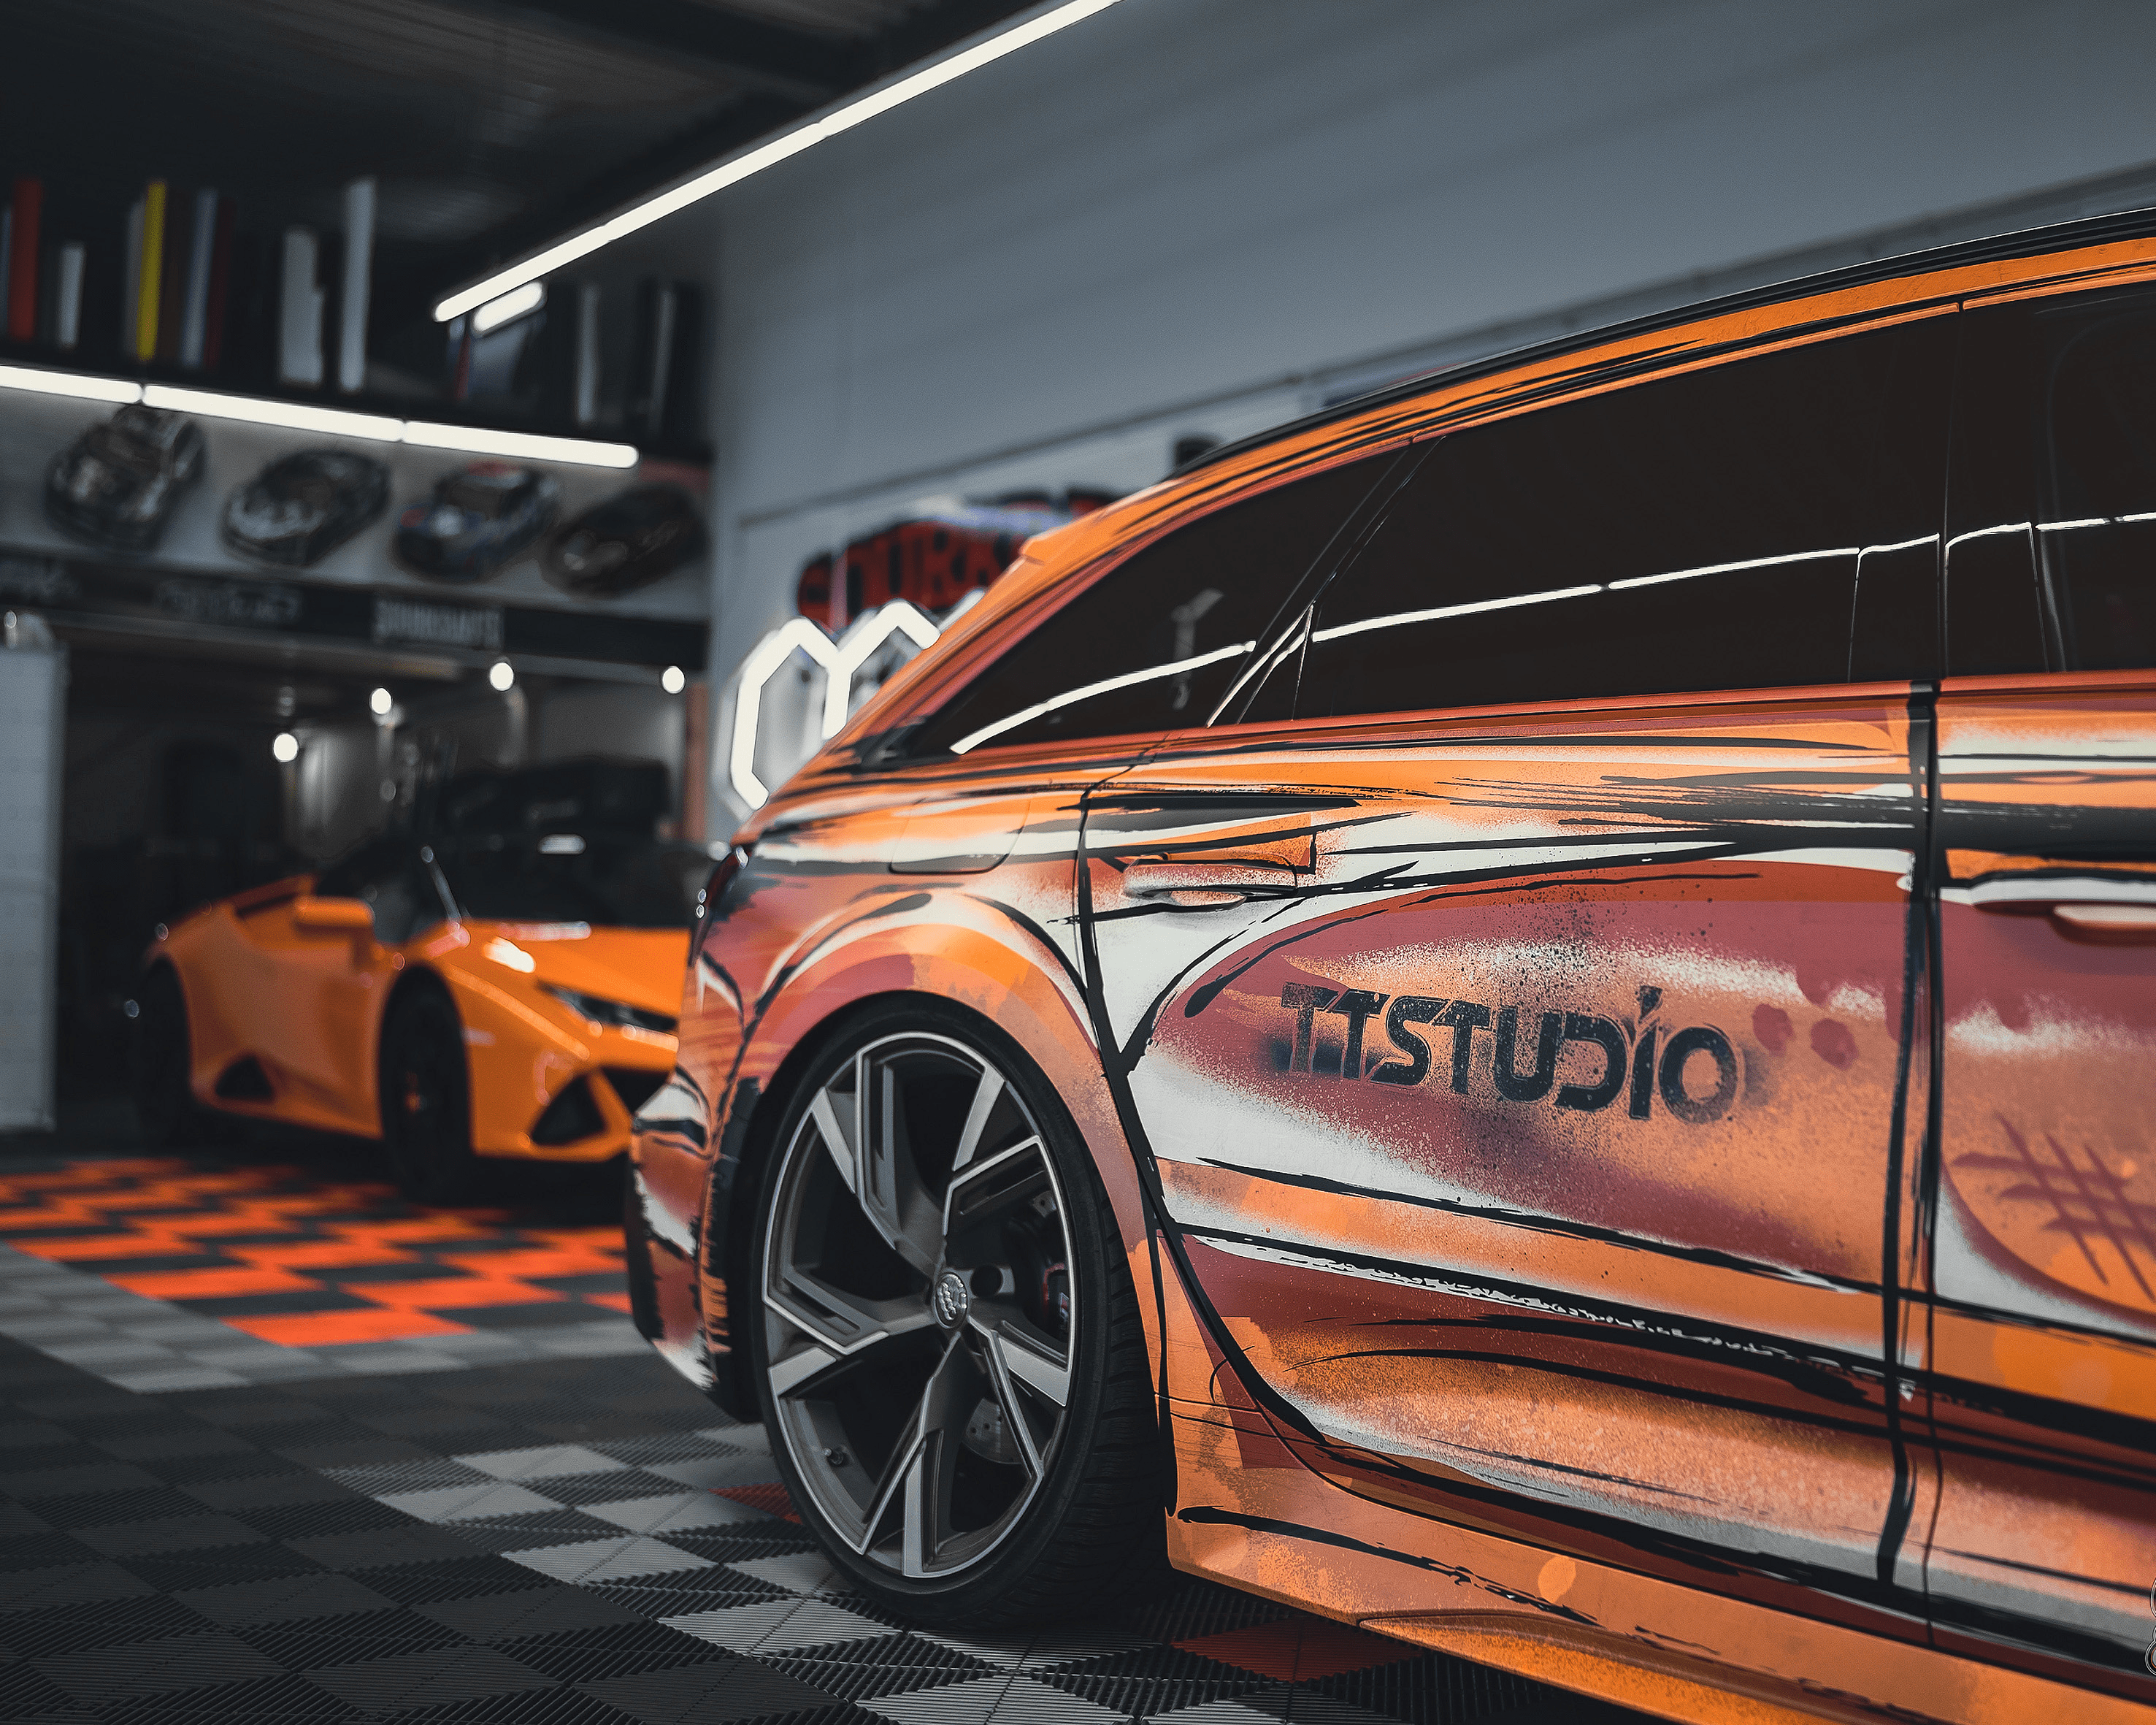 We are a design studio and we love making graphics for wrapping cars